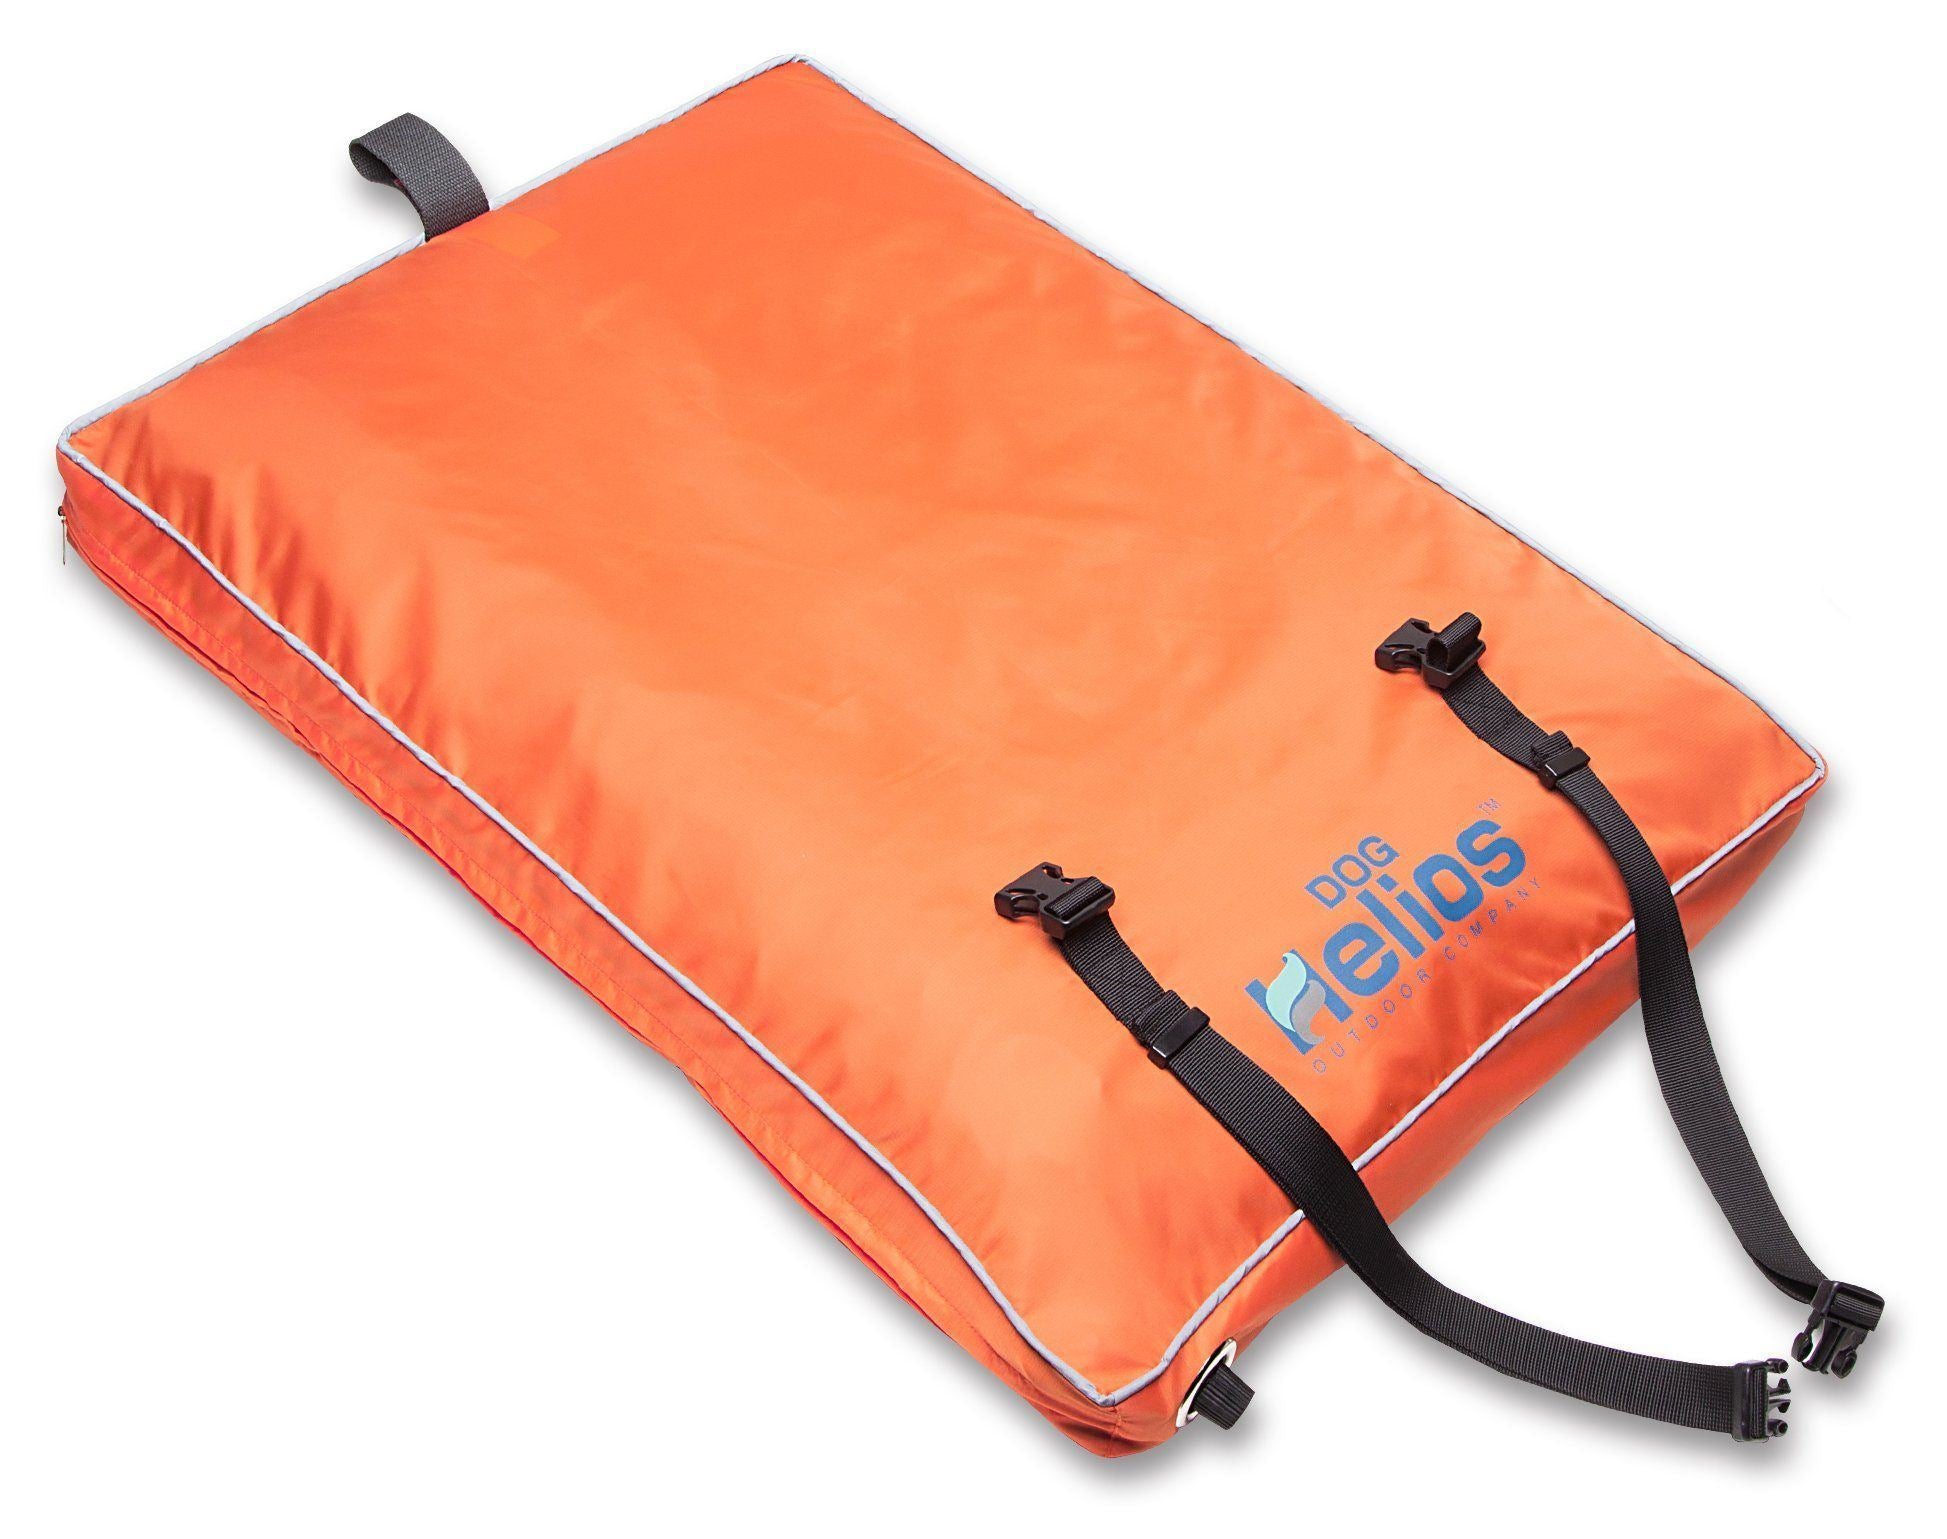 Dog Helios ® 'Aero-Inflatable' Folding Waterproof Inflatable Travel Camping Dog Bed Small Orange